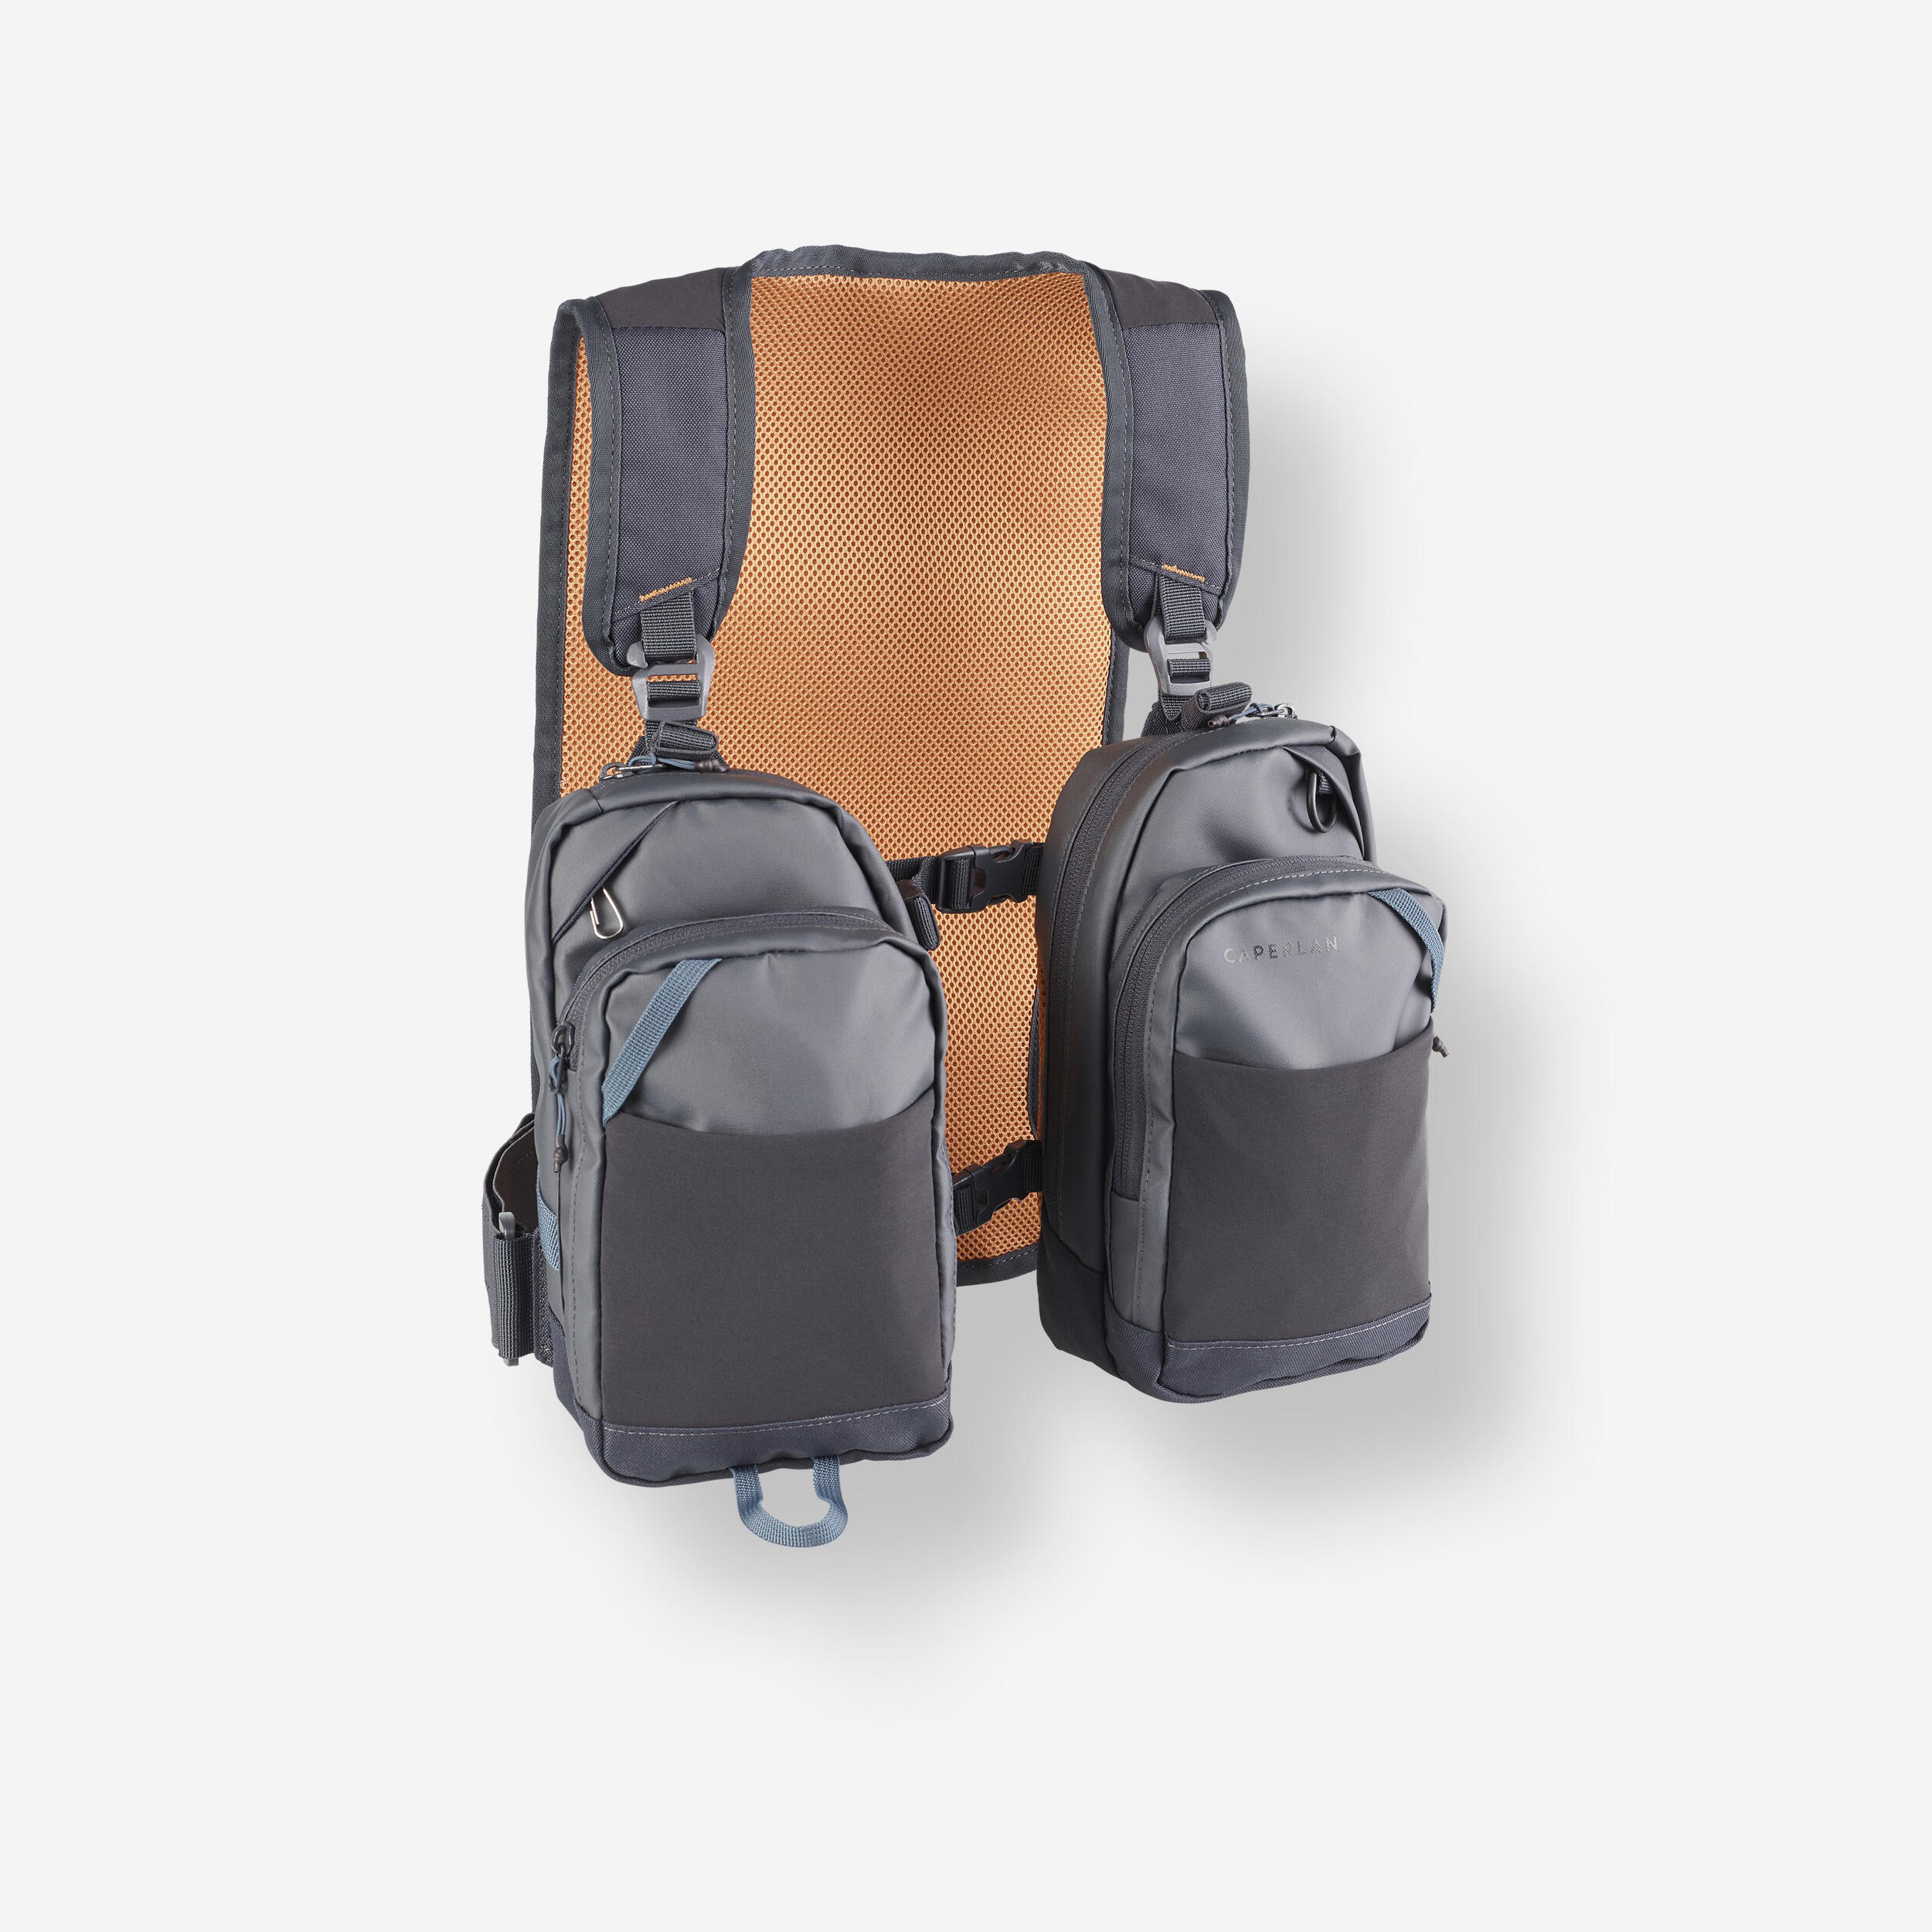 Dual Fishing Chest Pack 10 L - 500